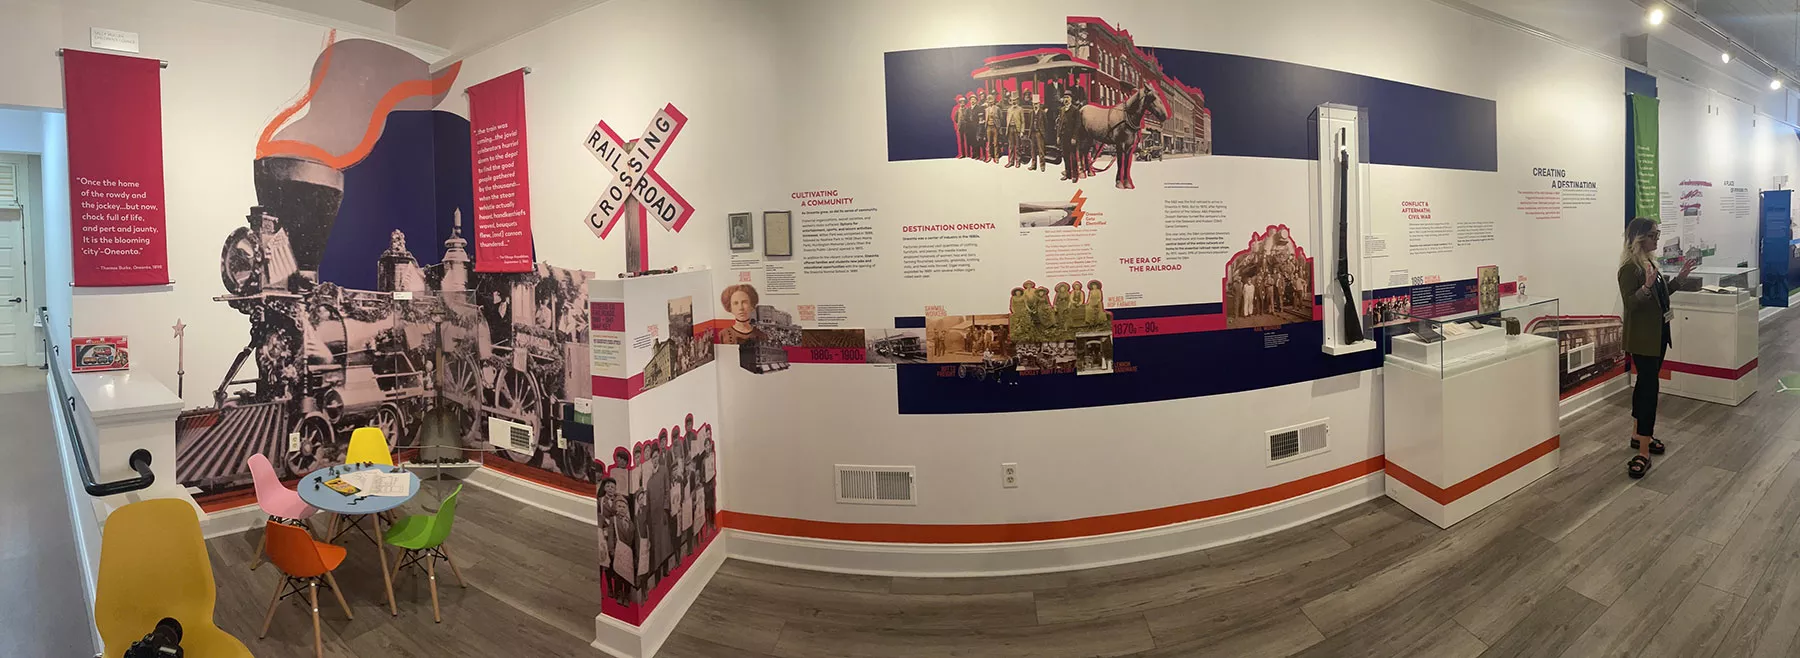 Panorama of Inside Historical Society Building